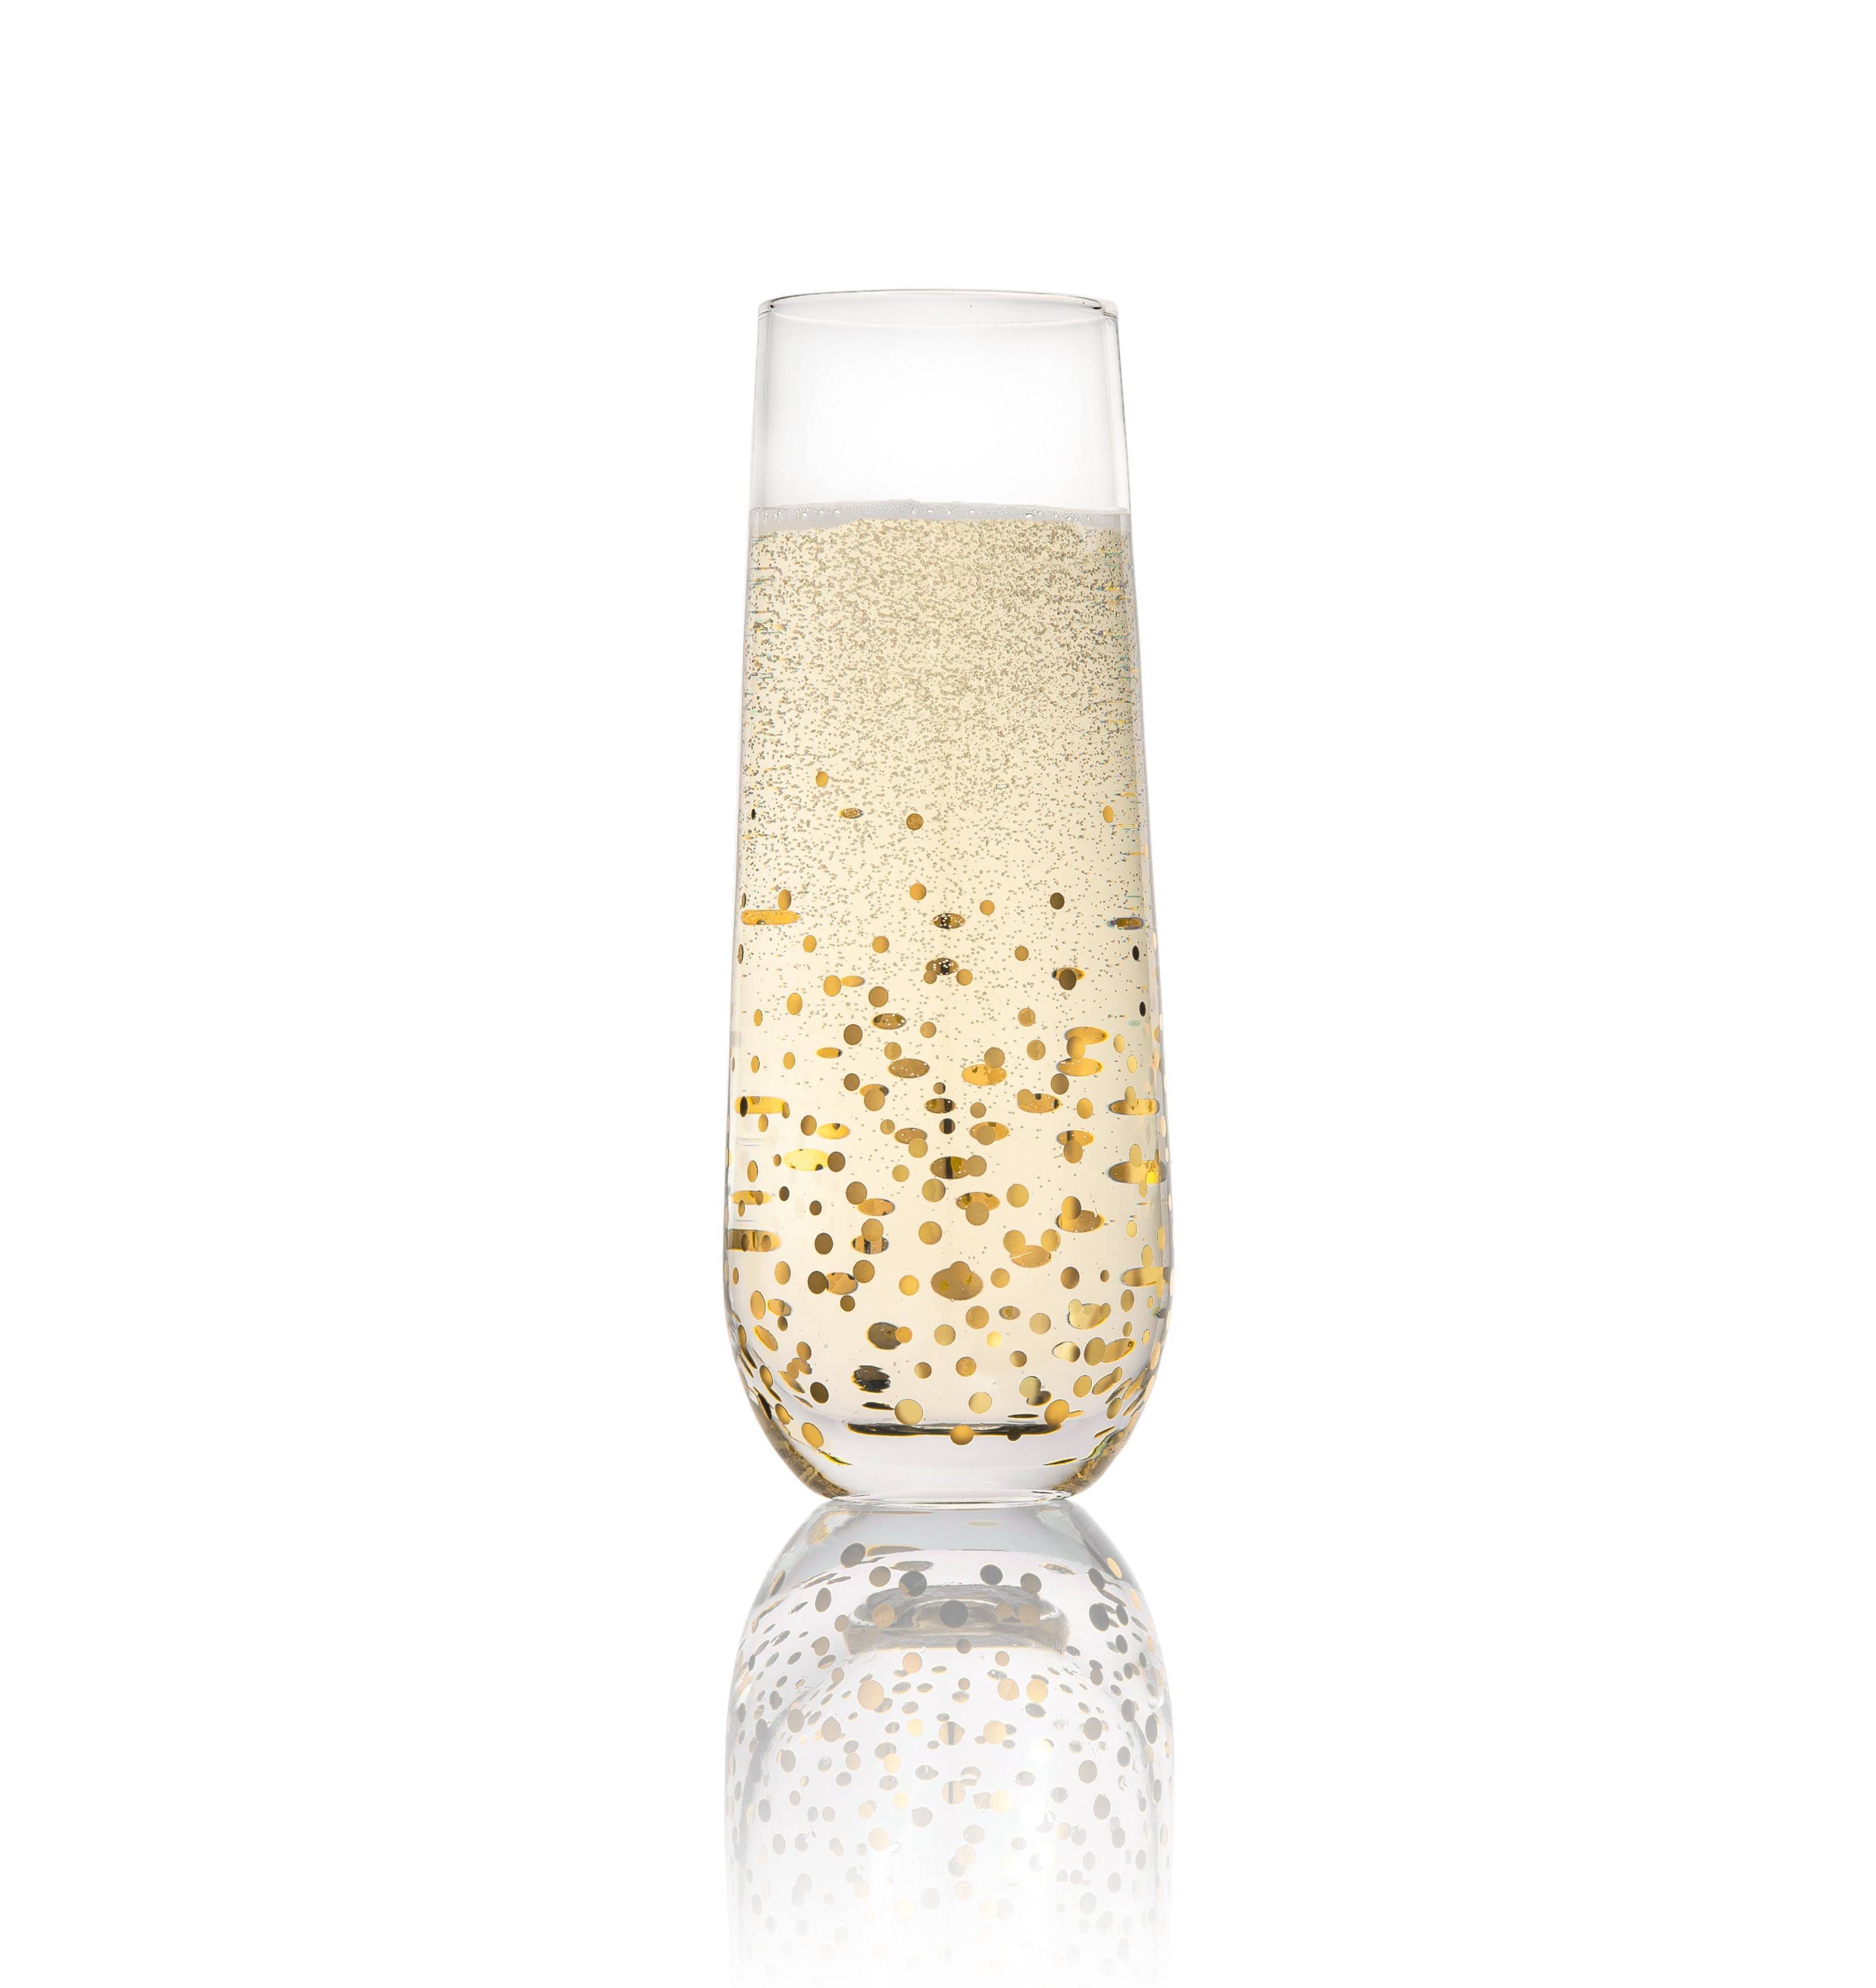 Mimosa Glasses Set of 4 Trinkware Goldosa Stemless Champagne Flute Glasses With Gold Luster 9oz 